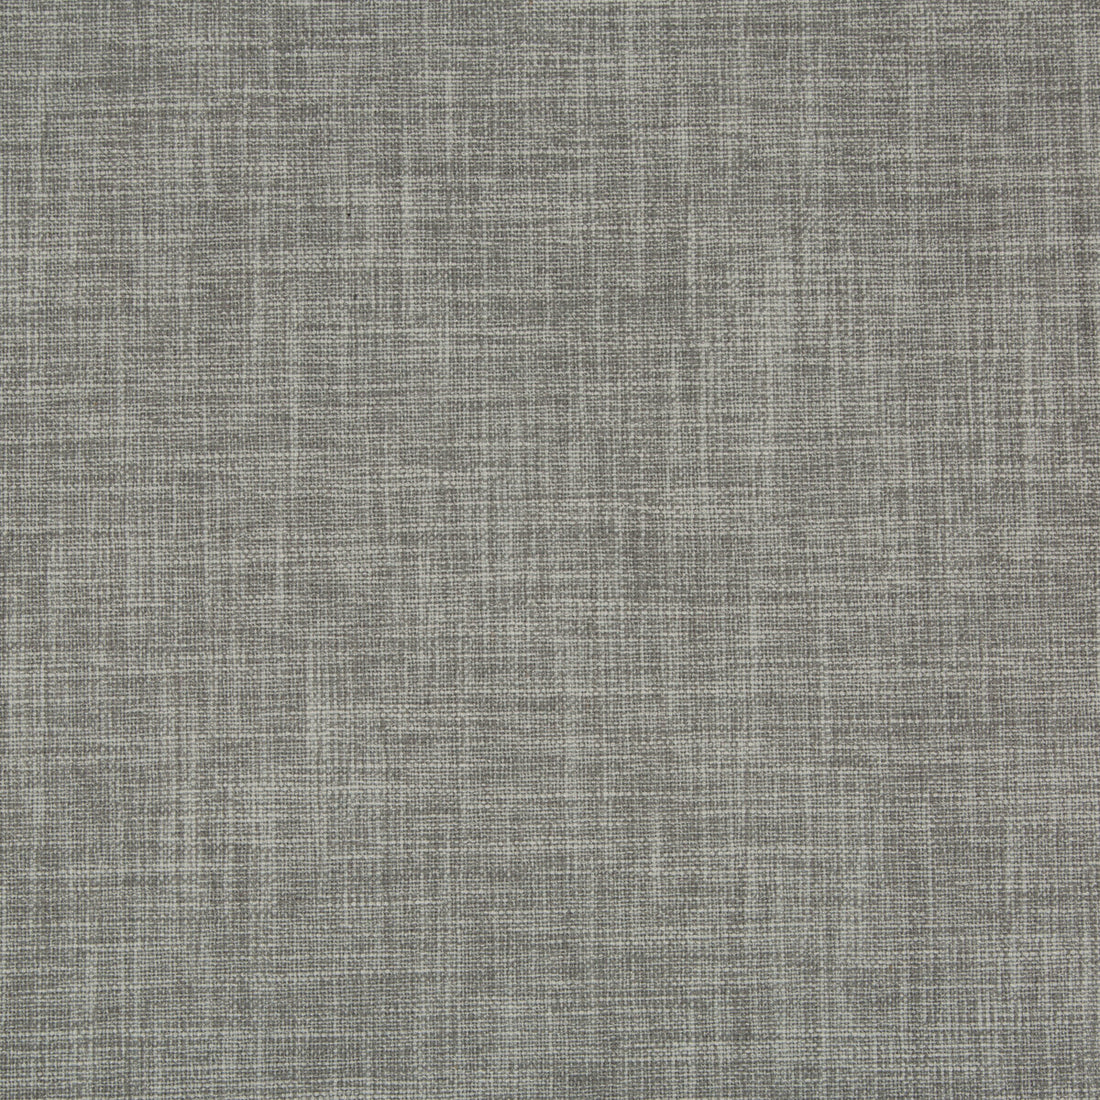 Everywhere fabric in pewter color - pattern 34587.11.0 - by Kravet Basics in the Thom Filicia Altitude collection